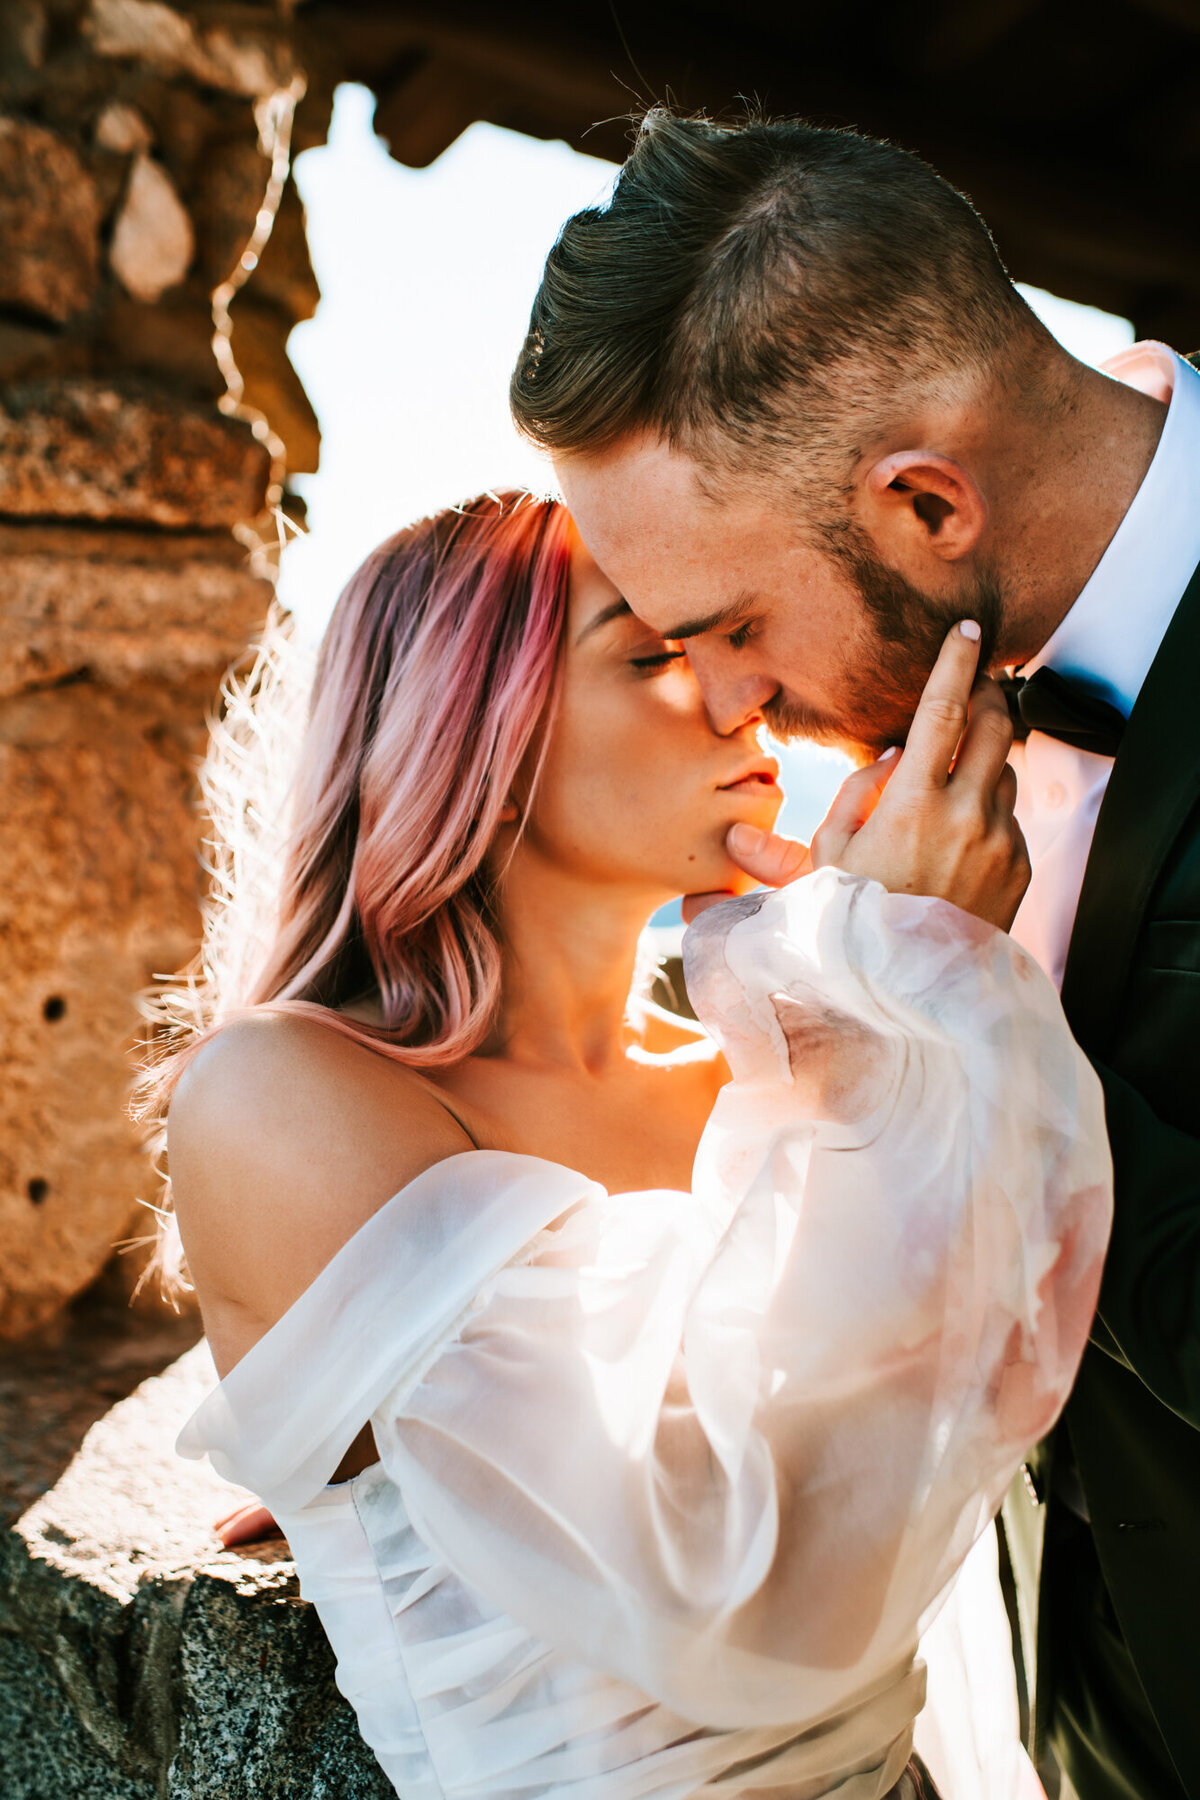 Couples Photography, woman in a wedding dress holds the face of a man in a suit who is leaning down and kissing her.